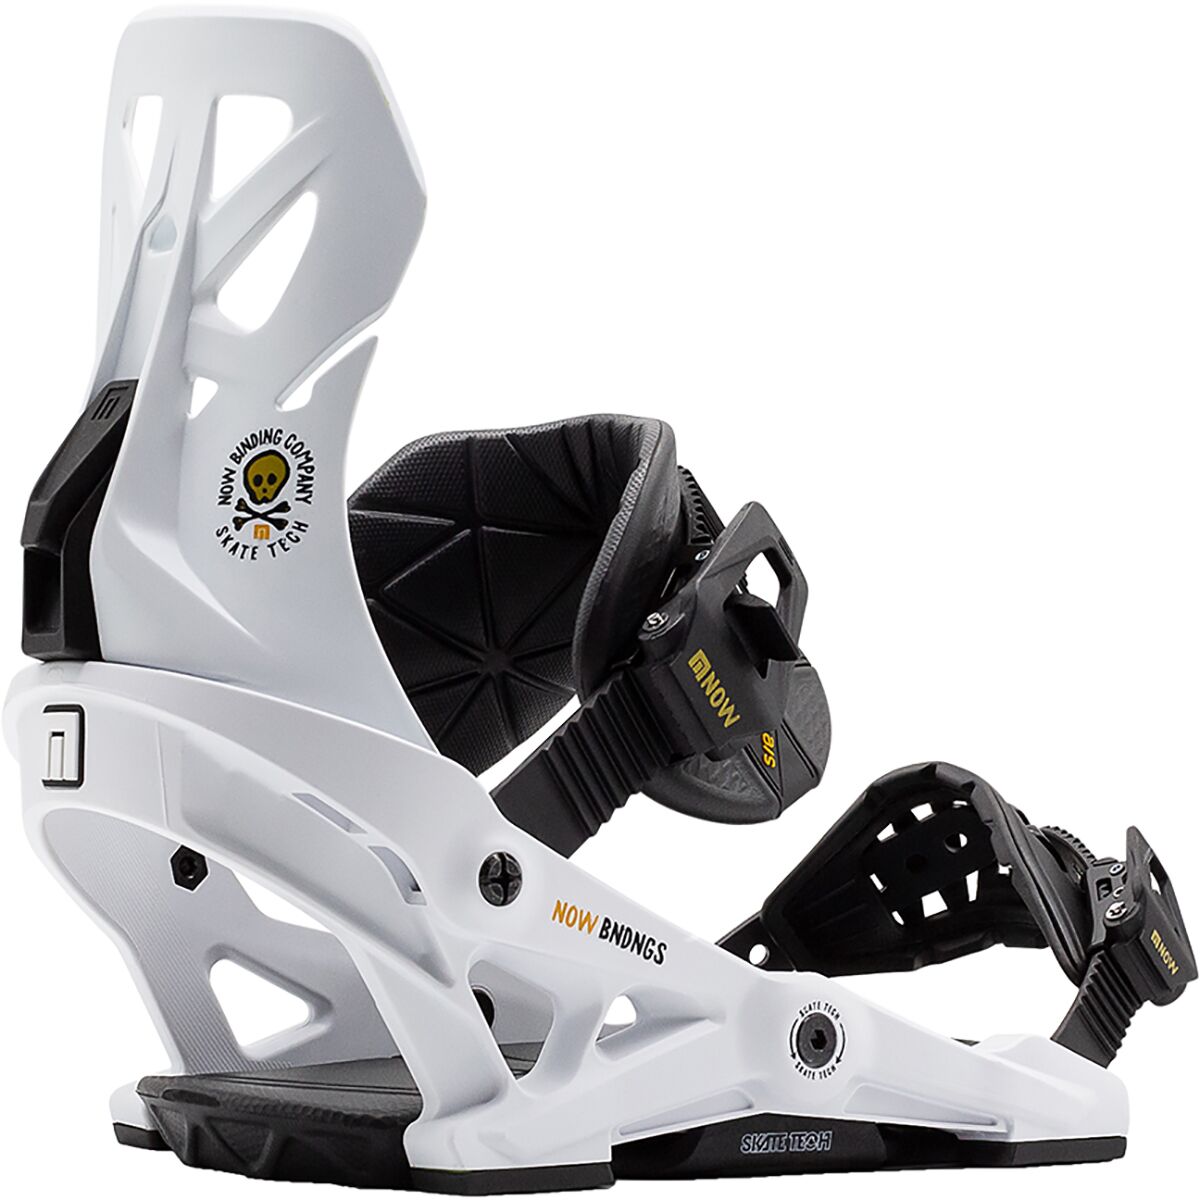 Brigade Snowboard Binding by Now | US-Parks.com